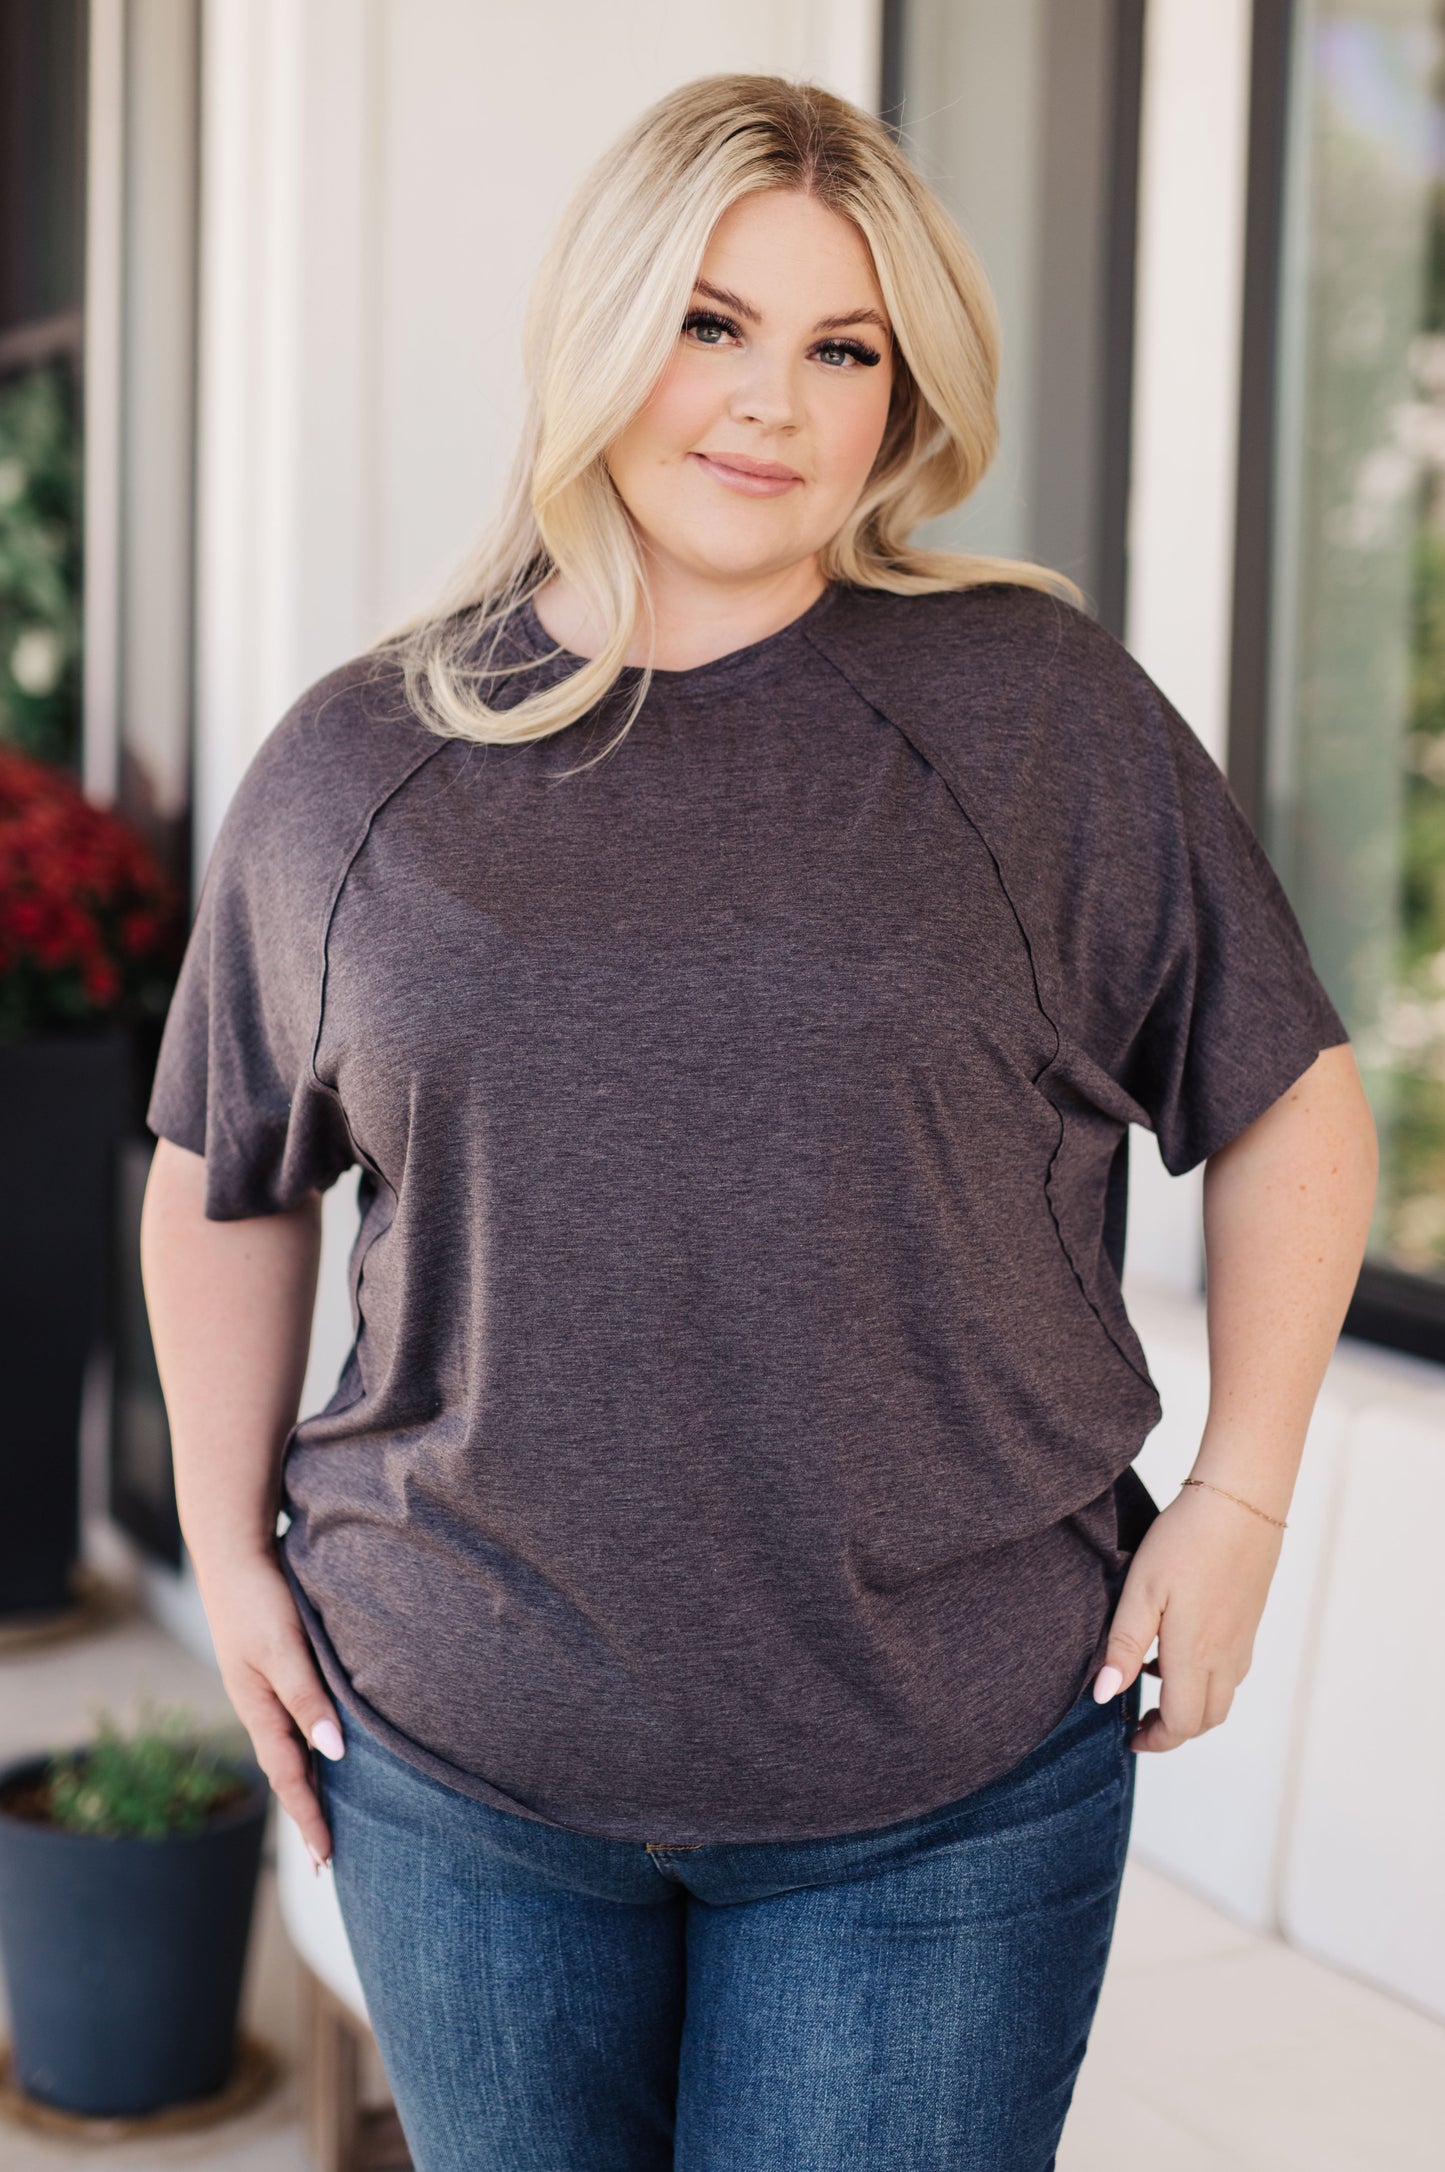 Tried And True Slouchy Tee in Eggplant